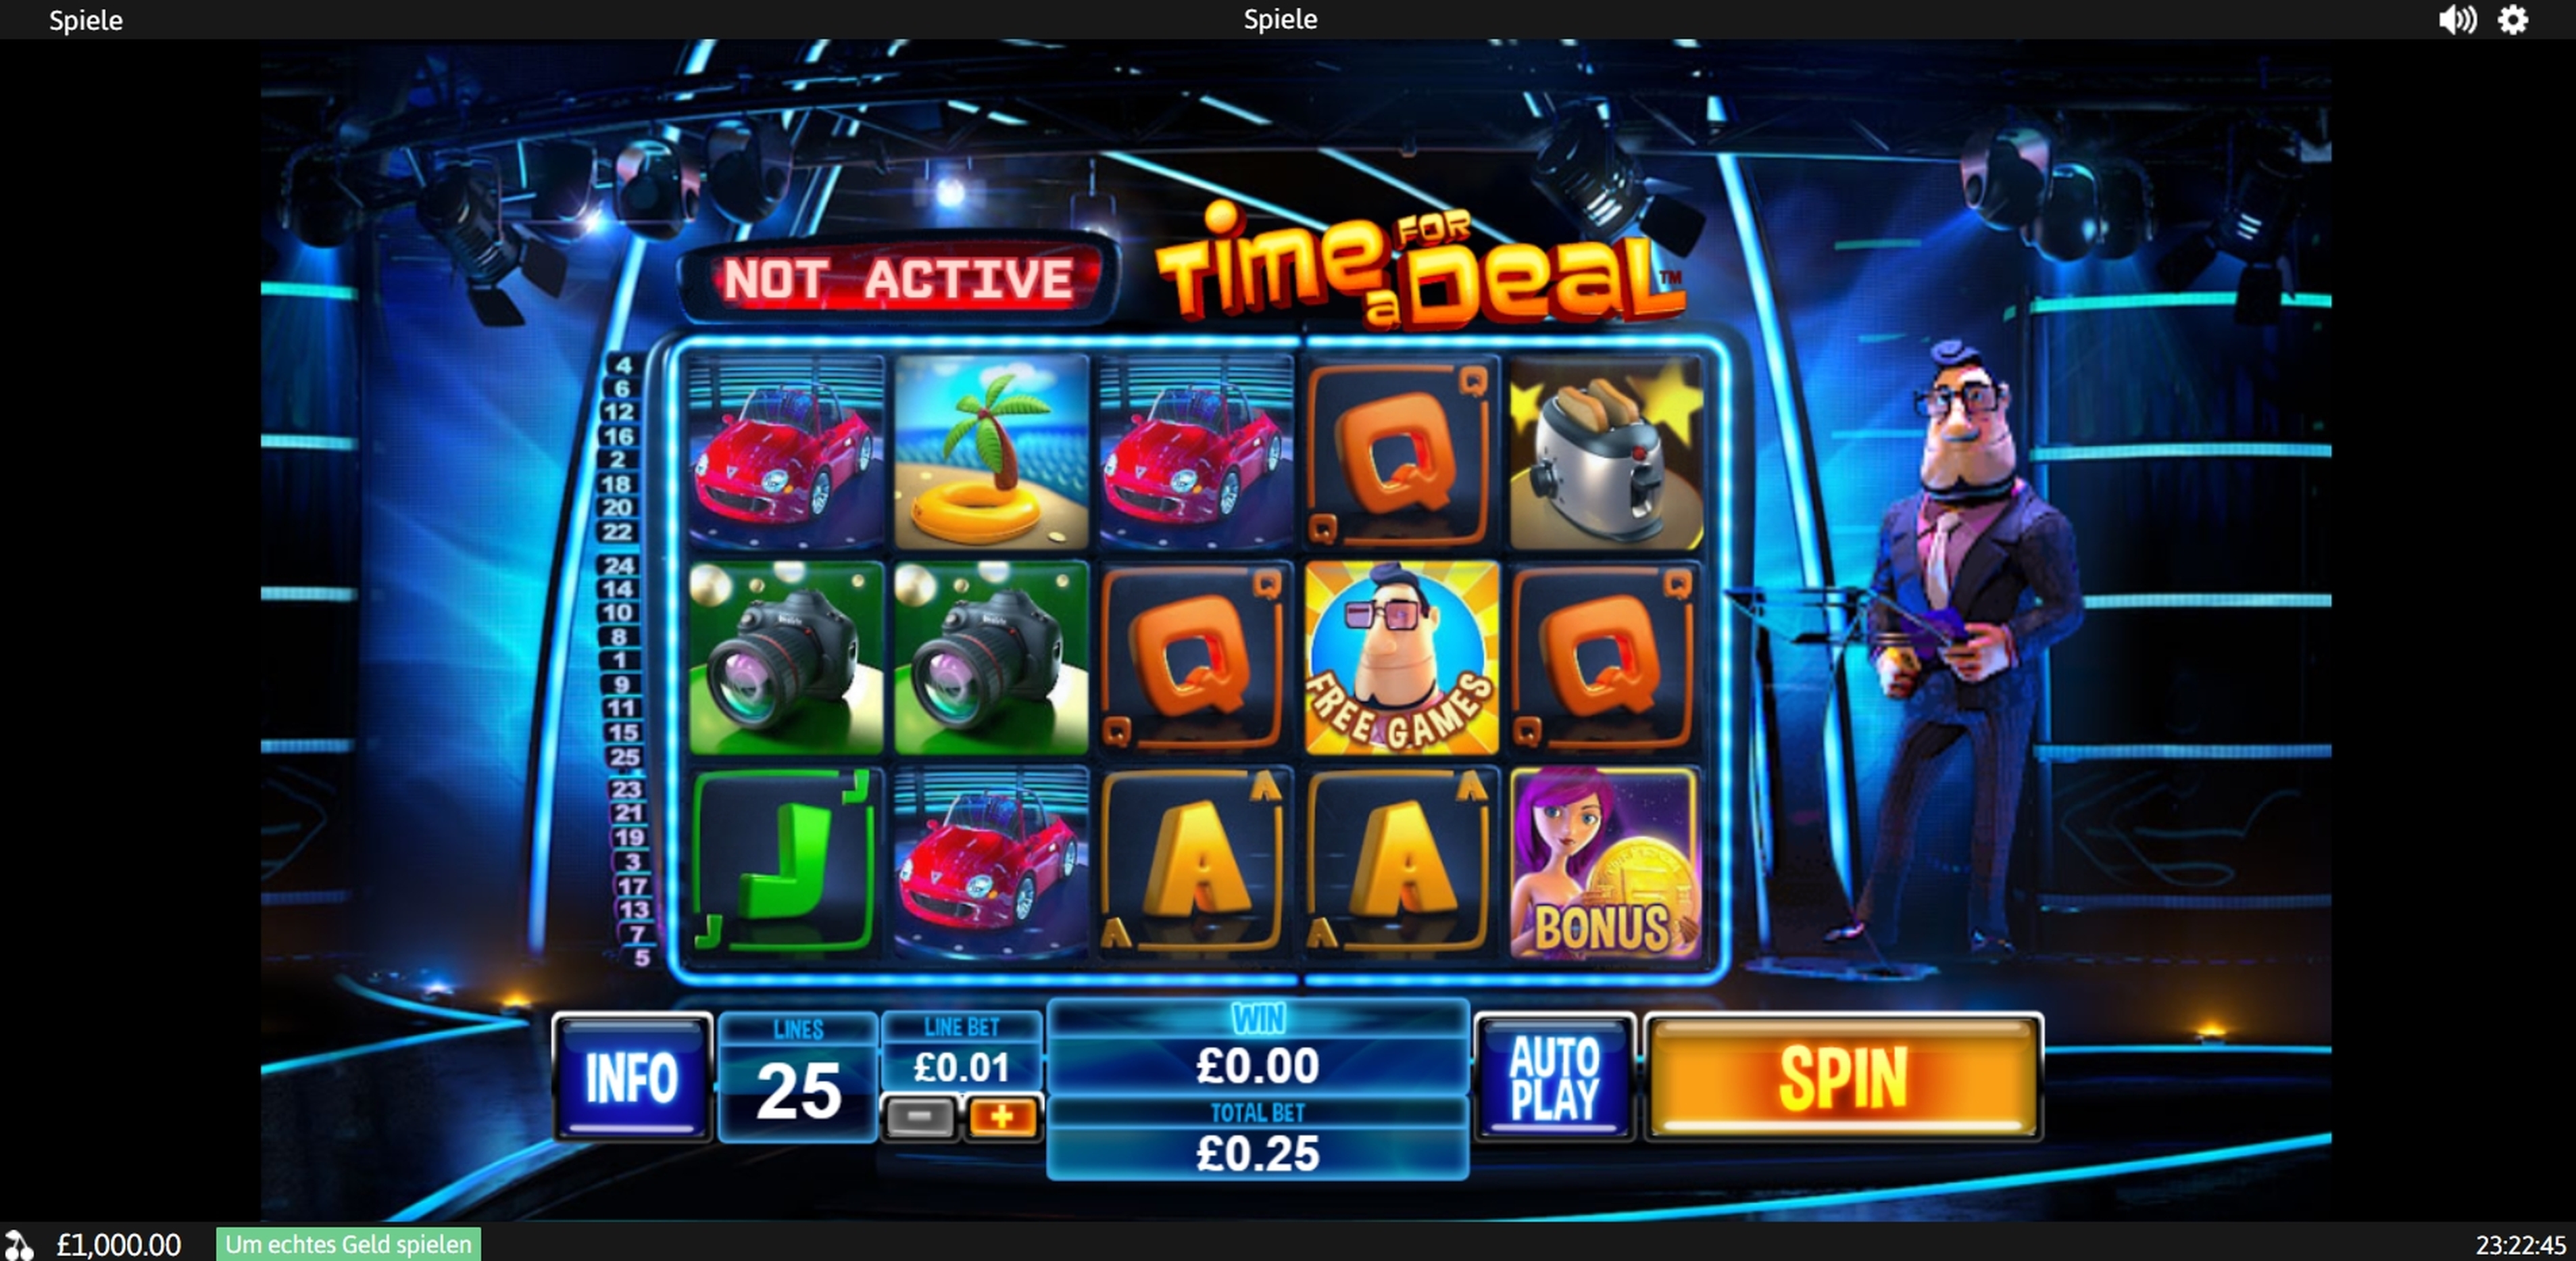 Reels in Time For a Deal Slot Game by SUNfox Games